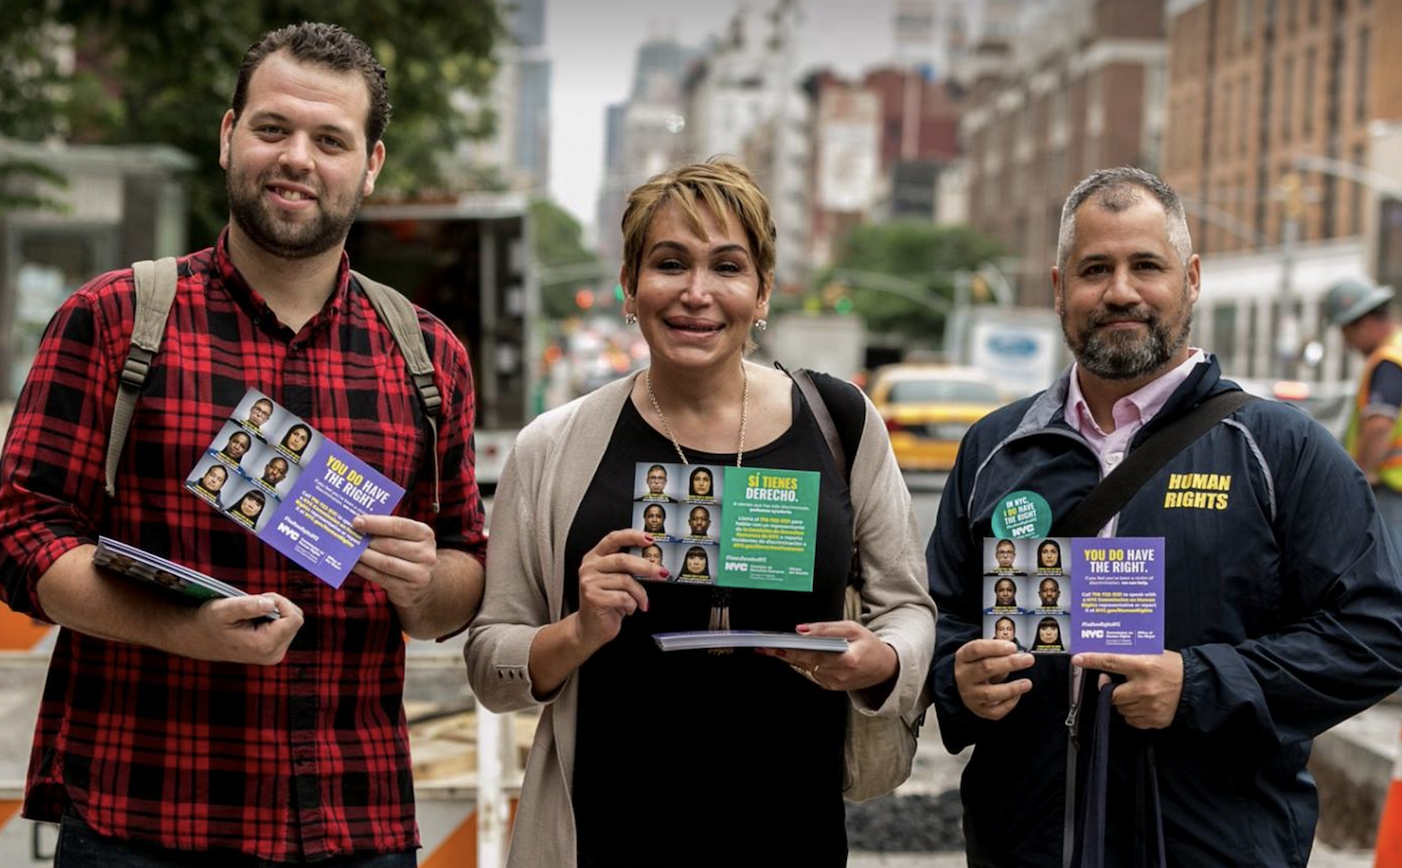 Three people, facing camera, holding up Commission palm cards that read “You Do Have The Right” in English and “Sí Tienes Derecho” in Spanish.